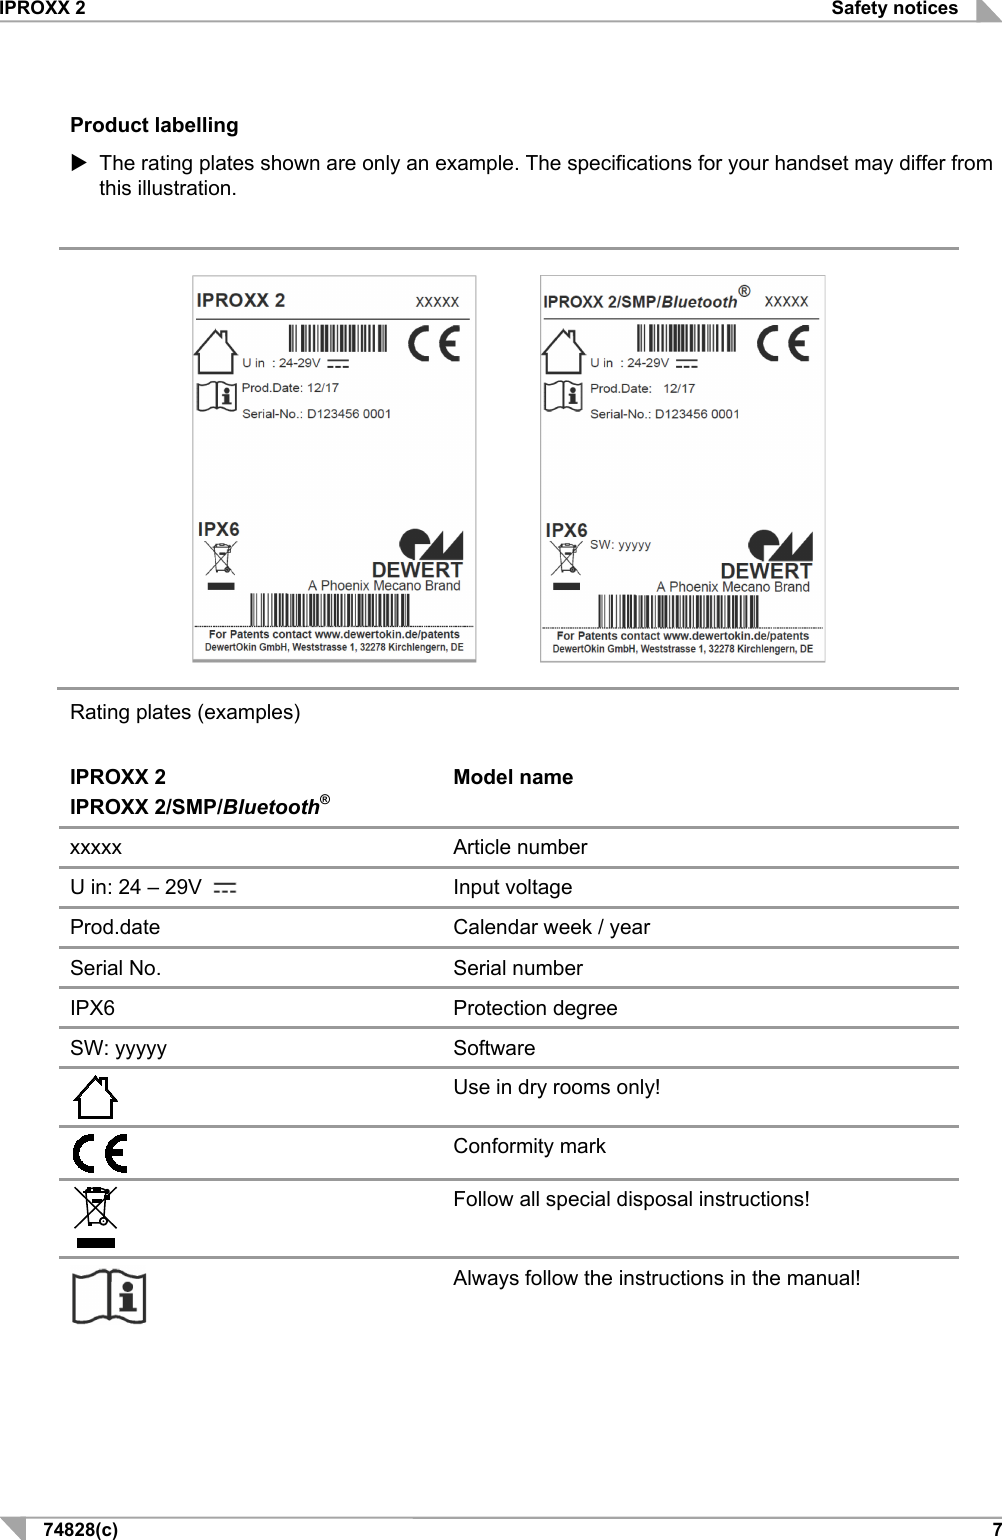 IPROXX 2 Safety notices 74828(c)   7 Product labelling  The rating plates shown are only an example. The specifications for your handset may differ from this illustration.               Rating plates (examples)  IPROXX 2  IPROXX 2/SMP/Bluetooth® Model name xxxxx Article number U in: 24 – 29V   Input voltage Prod.date Calendar week / year Serial No. Serial number IPX6 Protection degree SW: yyyyy Software  Use in dry rooms only!  Conformity mark  Follow all special disposal instructions!  Always follow the instructions in the manual!   